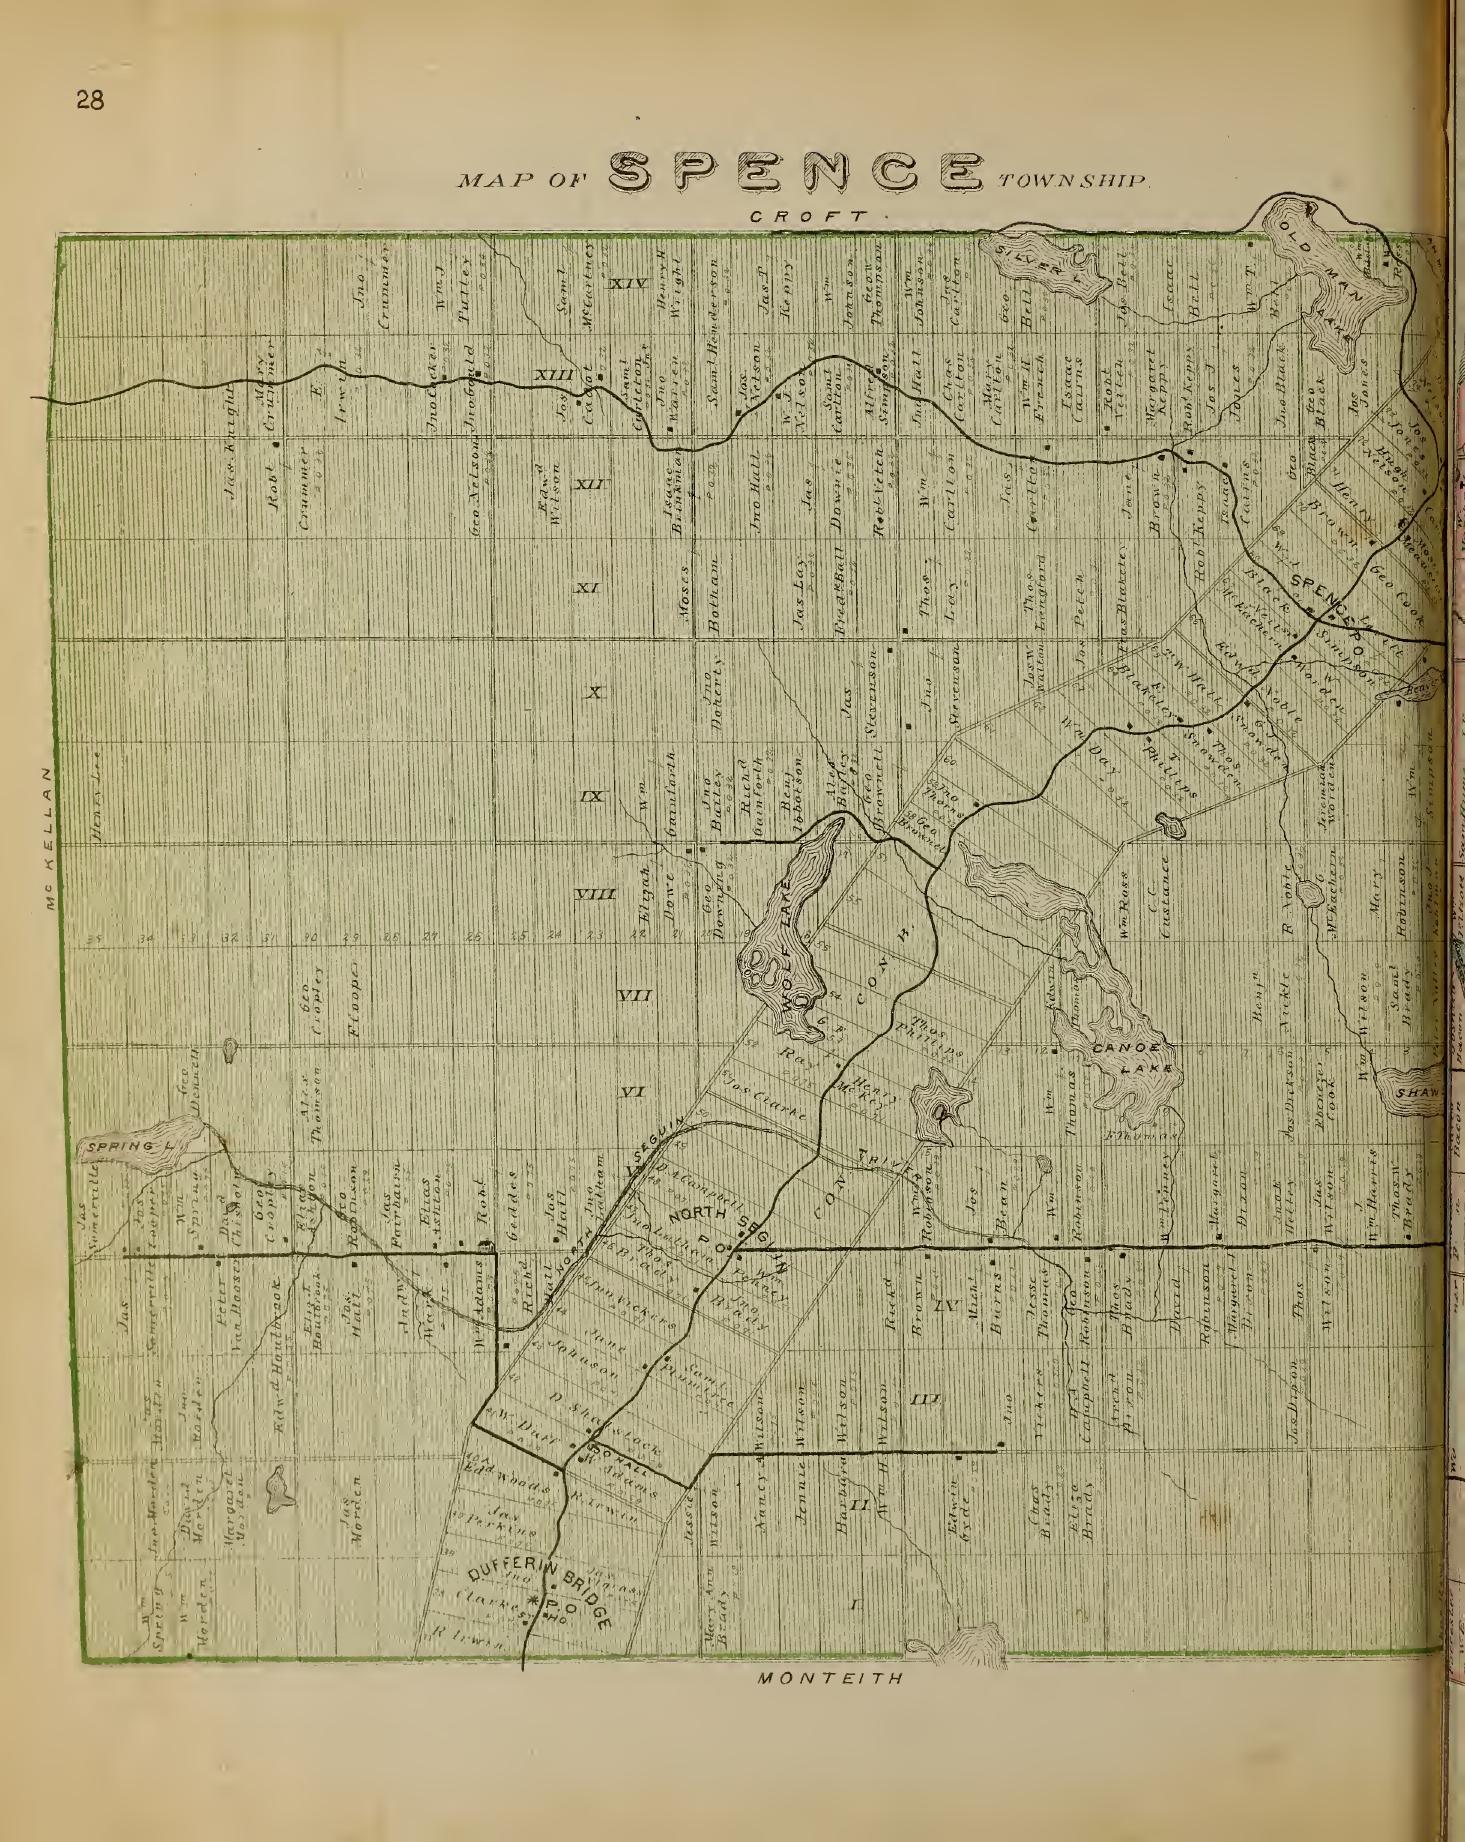 Historical map showing Concessions and Lots for spence